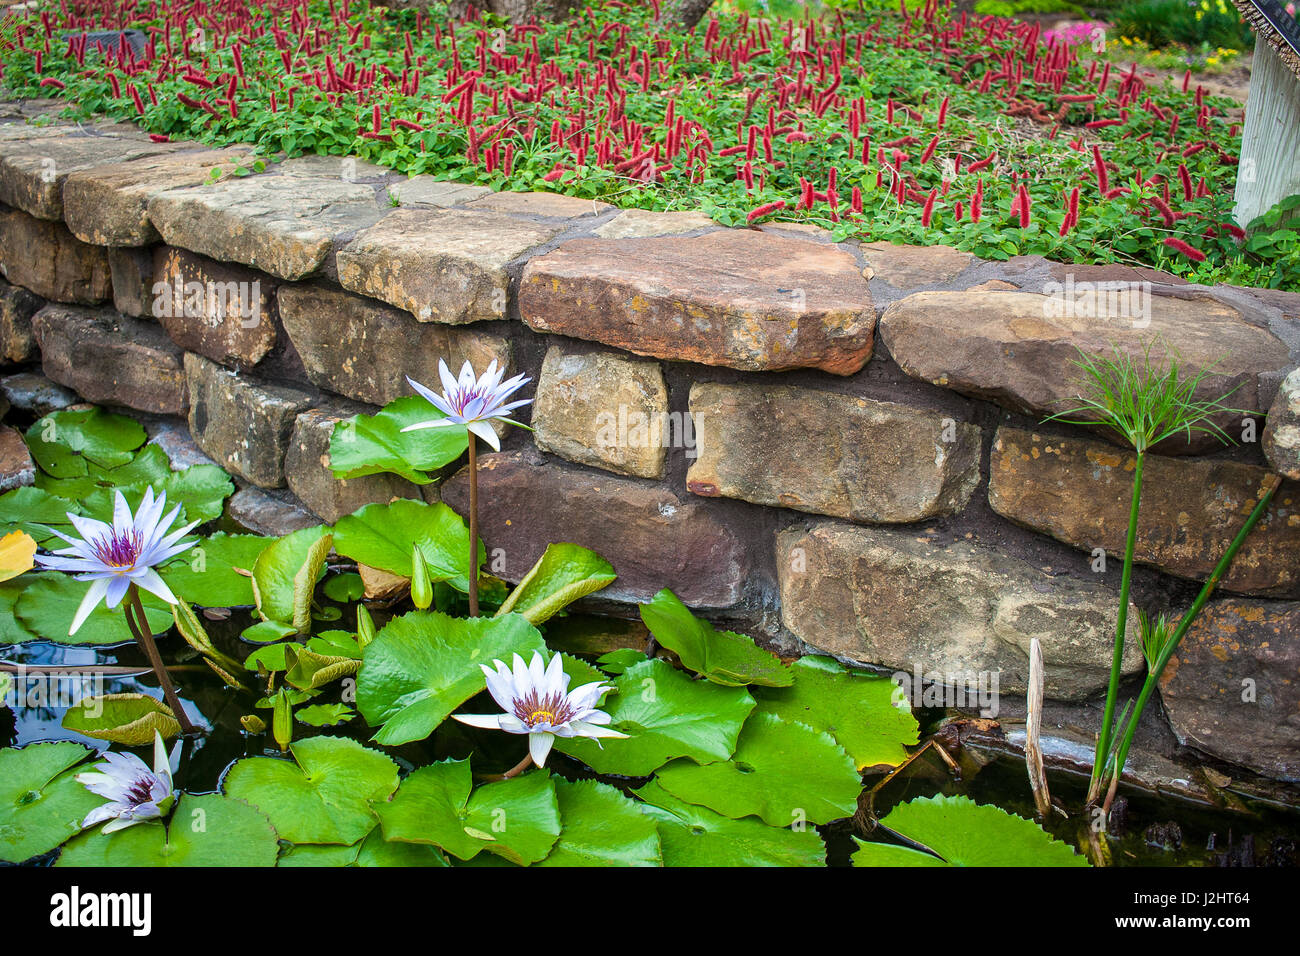 Water lillies and Texas mountain laurel growing in a botanical garden Stock Photo